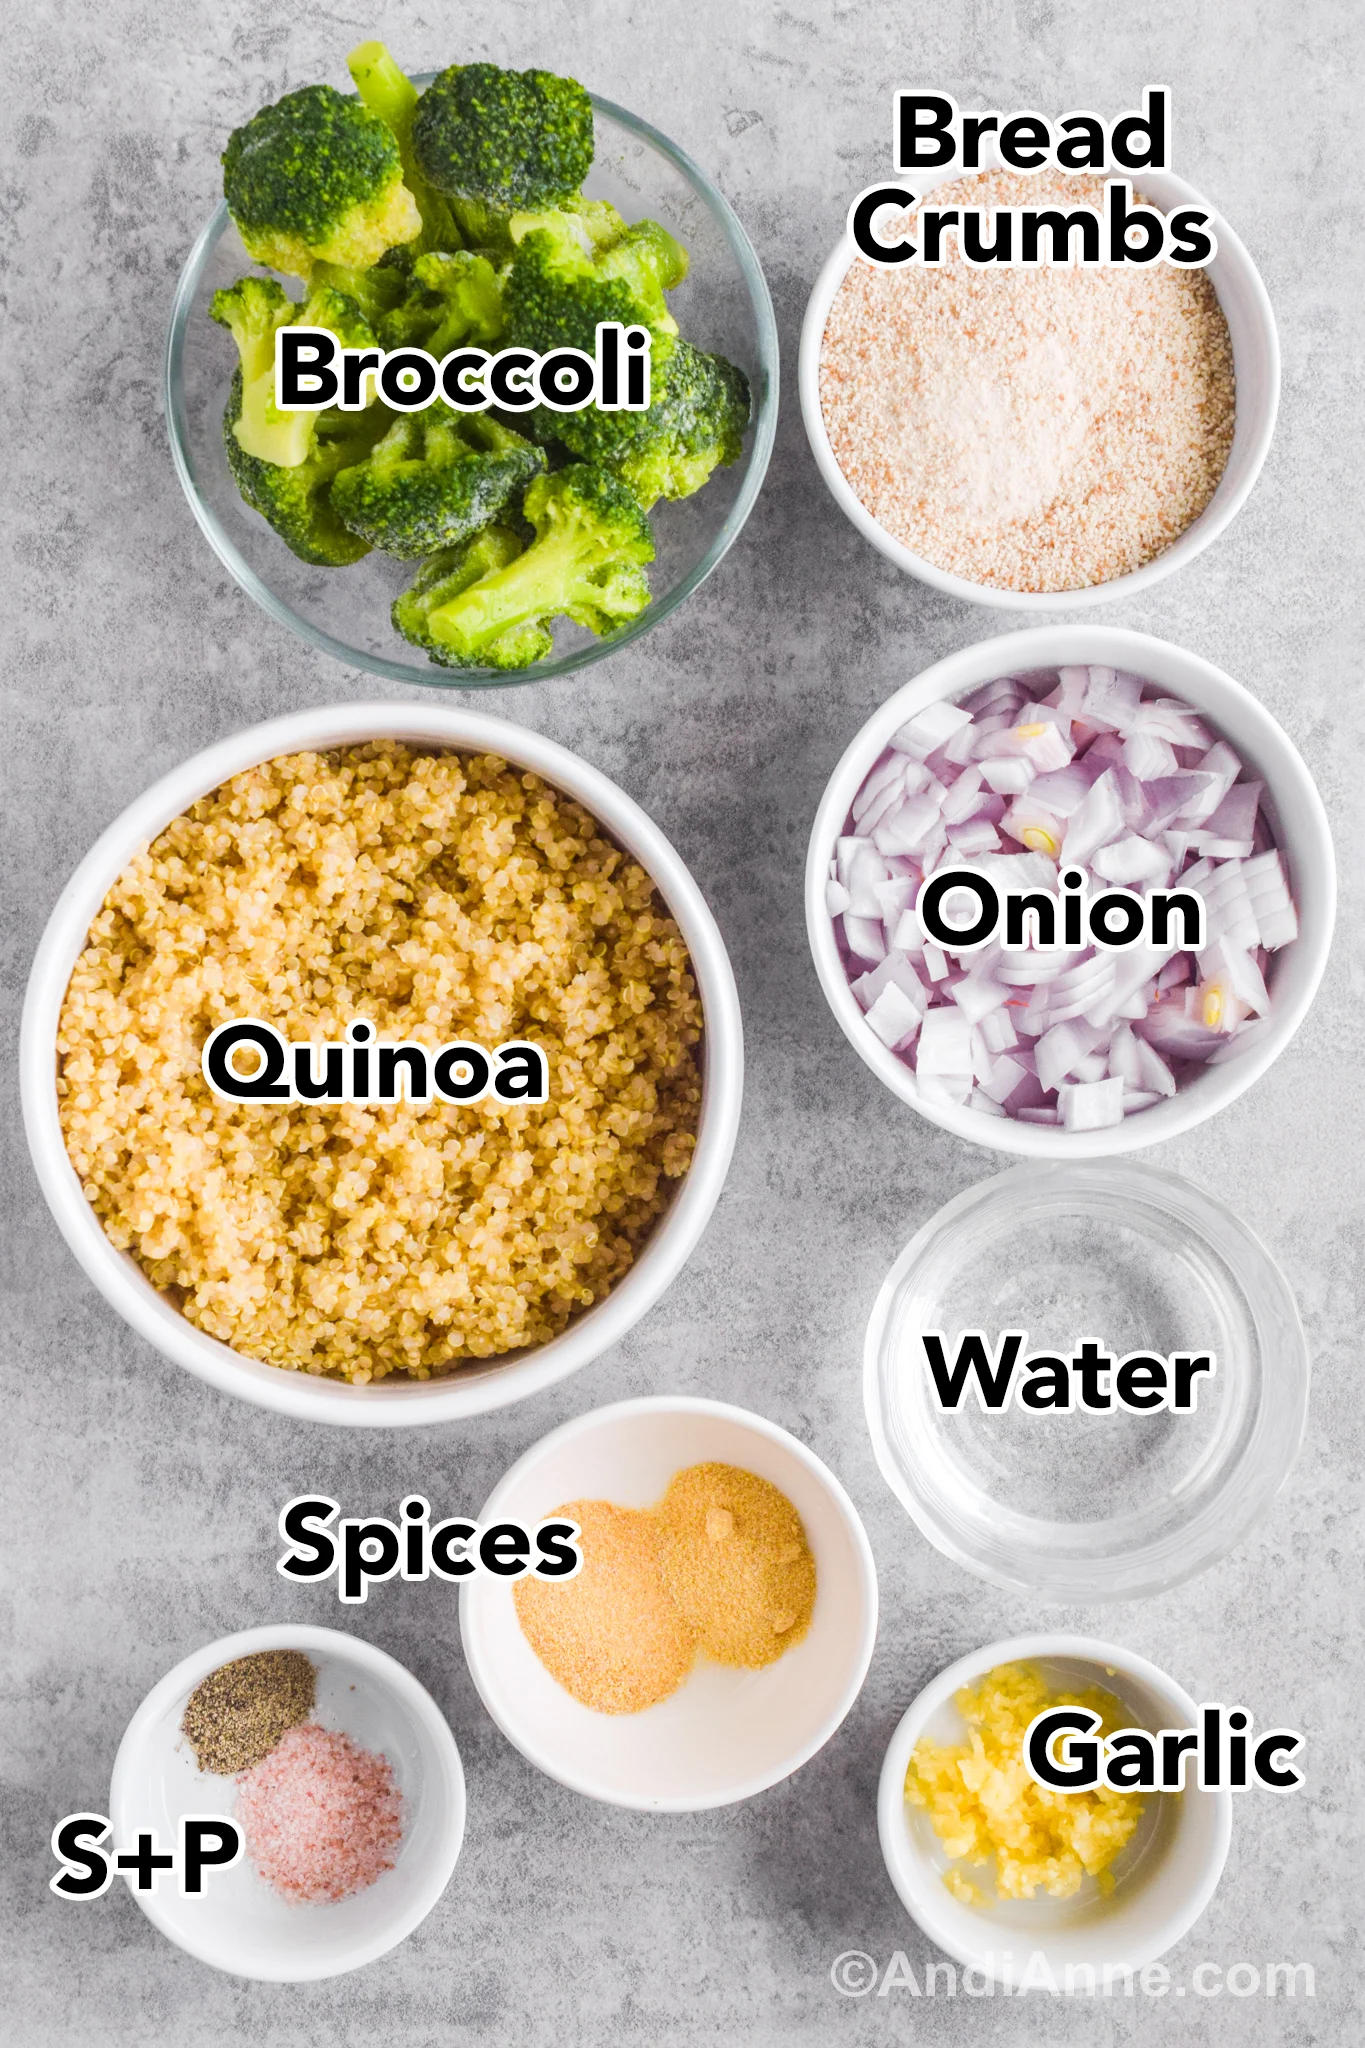 Recipe ingredients on a table including bowl of frozen broccoli, bowl of breadcrumbs, bowl of cooked quinoa, chopped onion, spices, and minced garlic.